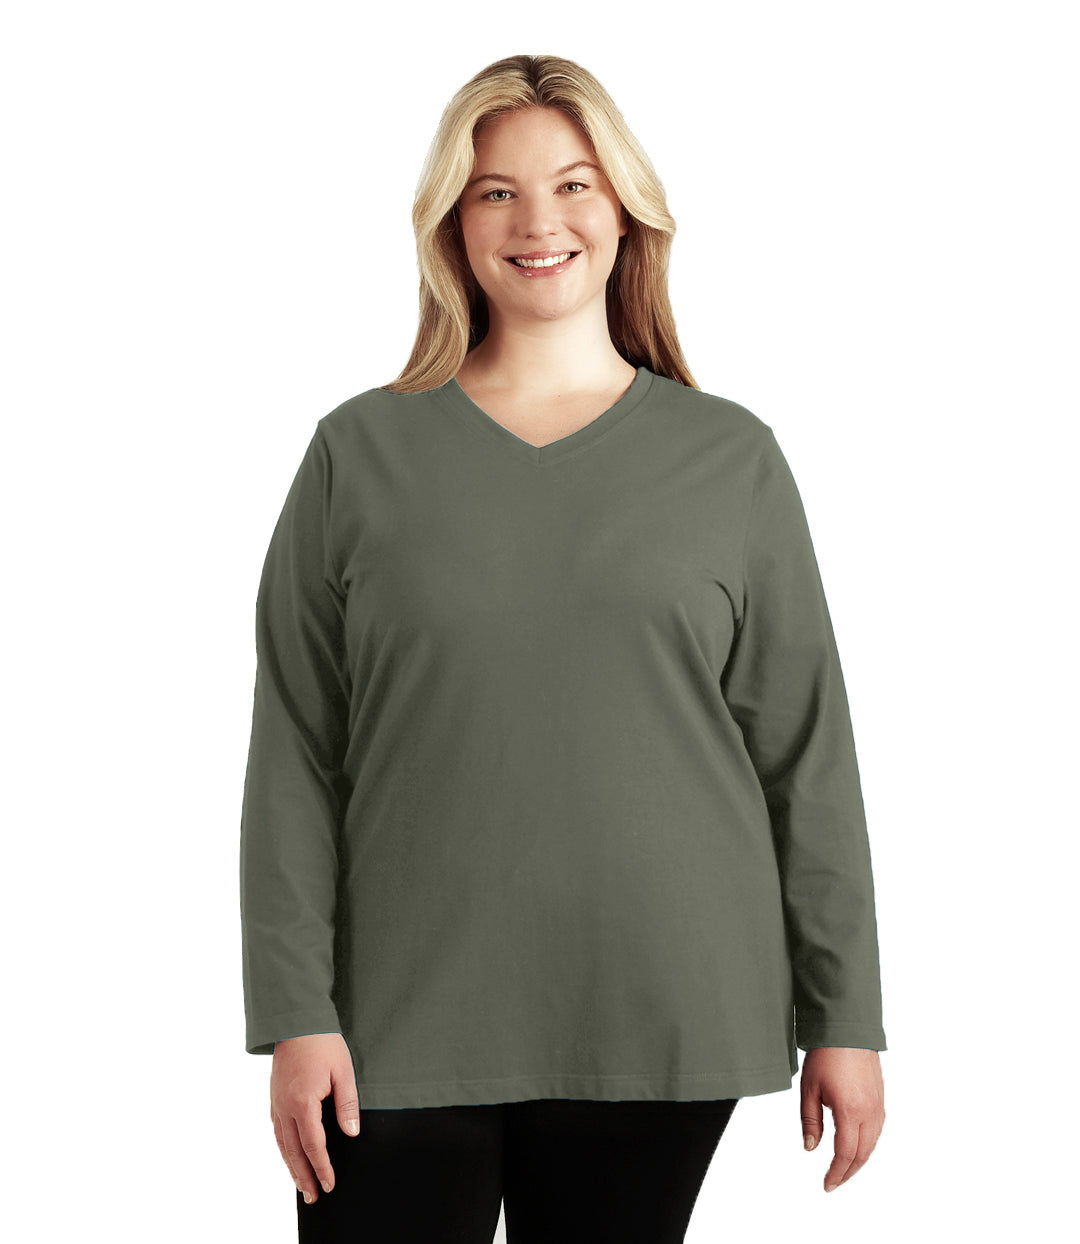 Plus size woman, facing front, wearing JunoActive plus size Stretch Naturals Long Sleeve V-Neck Top in the color Moss Green. She is wearing JunoActive Plus Size Leggings in the color Black.